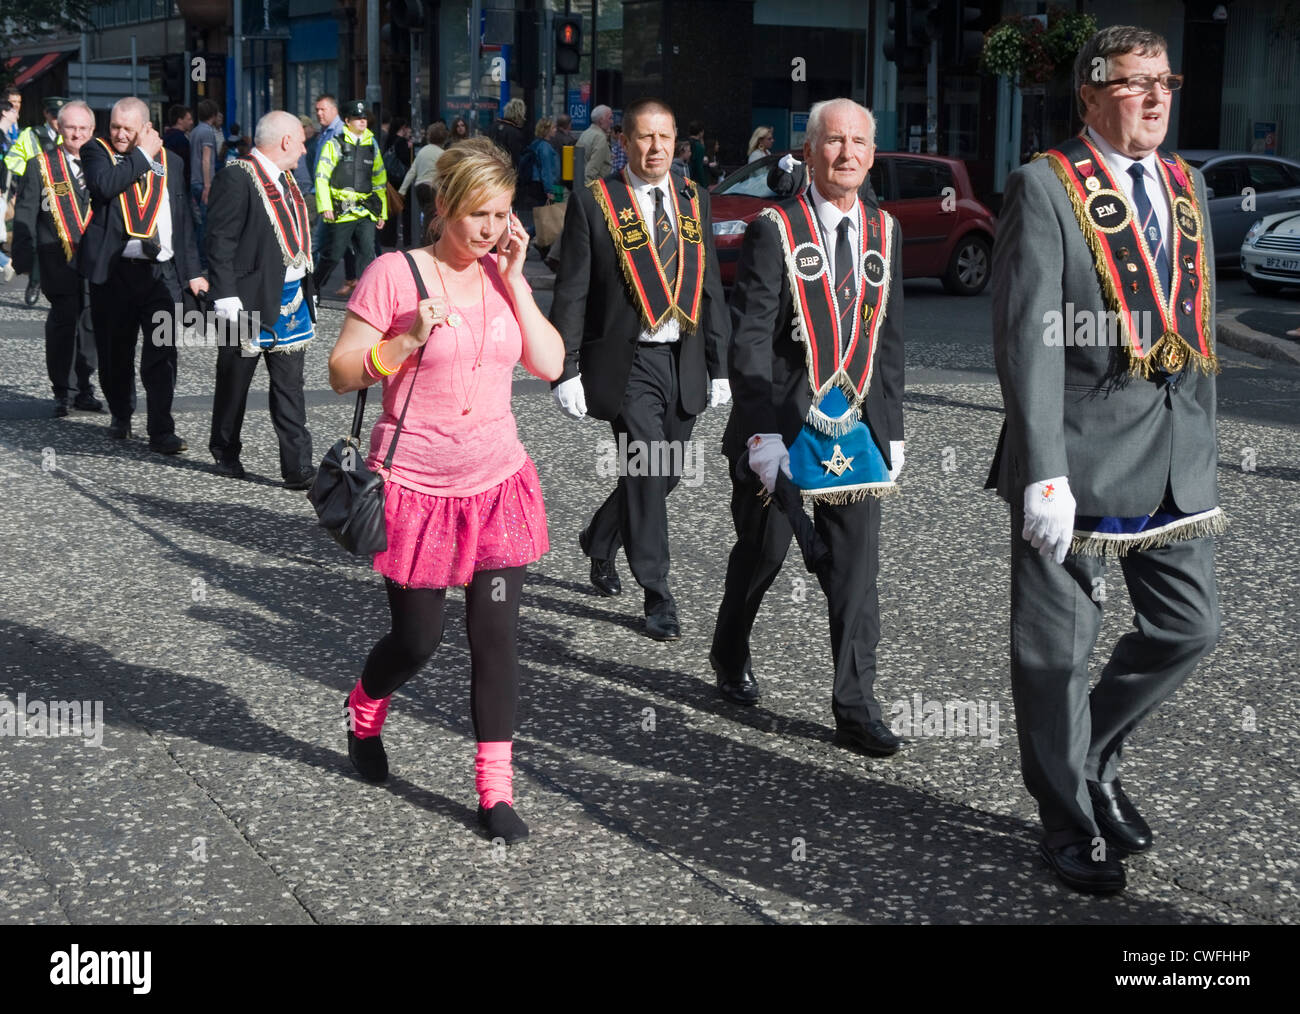 Woman in pink among members of the Orange Order, Donegall Square South, Belfast. Stock Photo